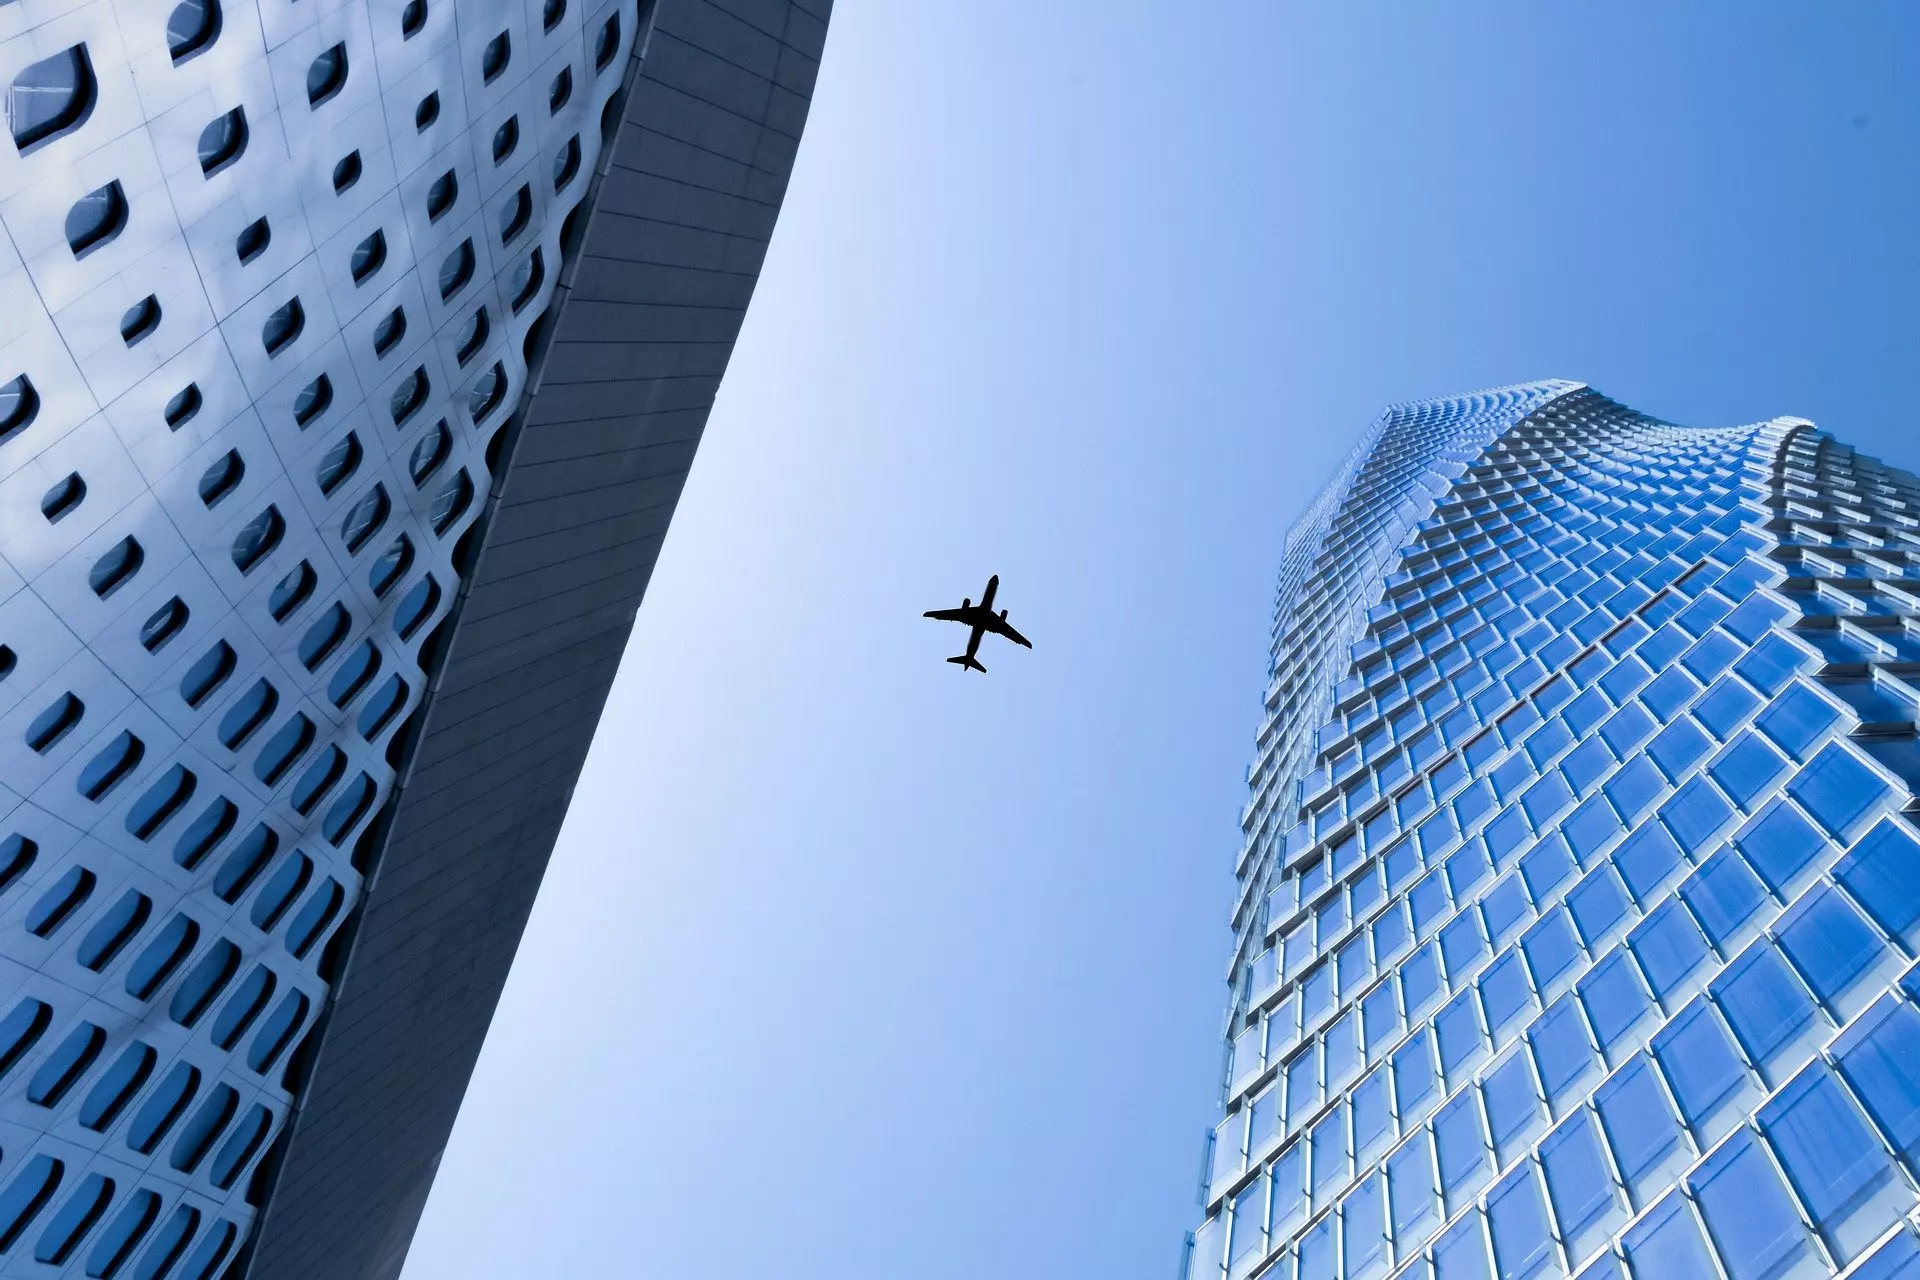 Skyscrapers viewed from below with a plane silhouetted against a blue sky